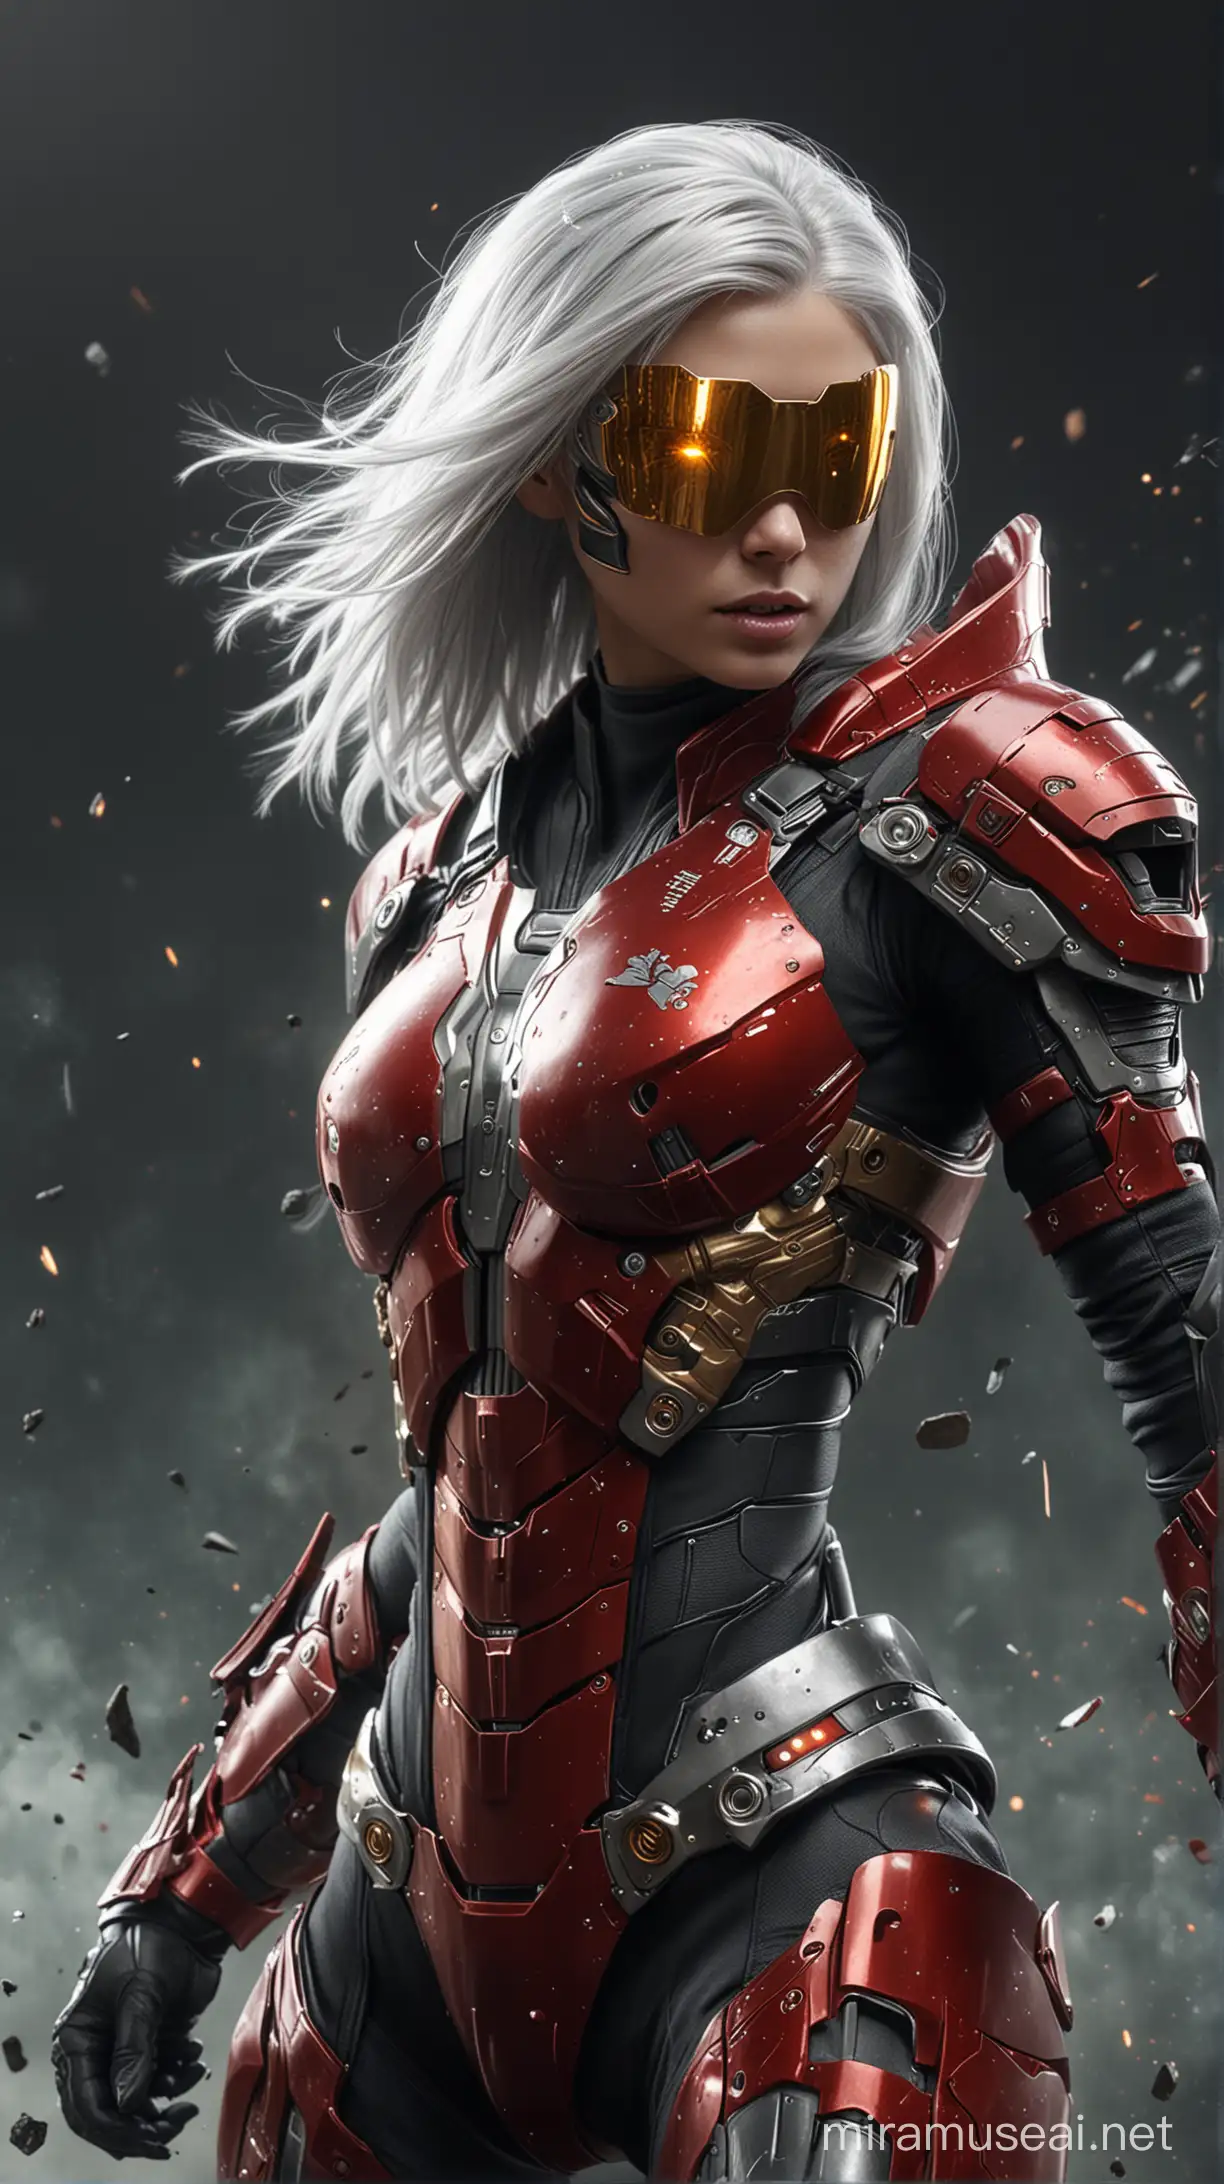 futuristic space warrior in full armor, helmet with visor and silver hair flying through the air, action pose, detailed background, fantasy art style, dark red and light gold, hyperrealistic details, dark gray and black, closeup intensity, high resolution